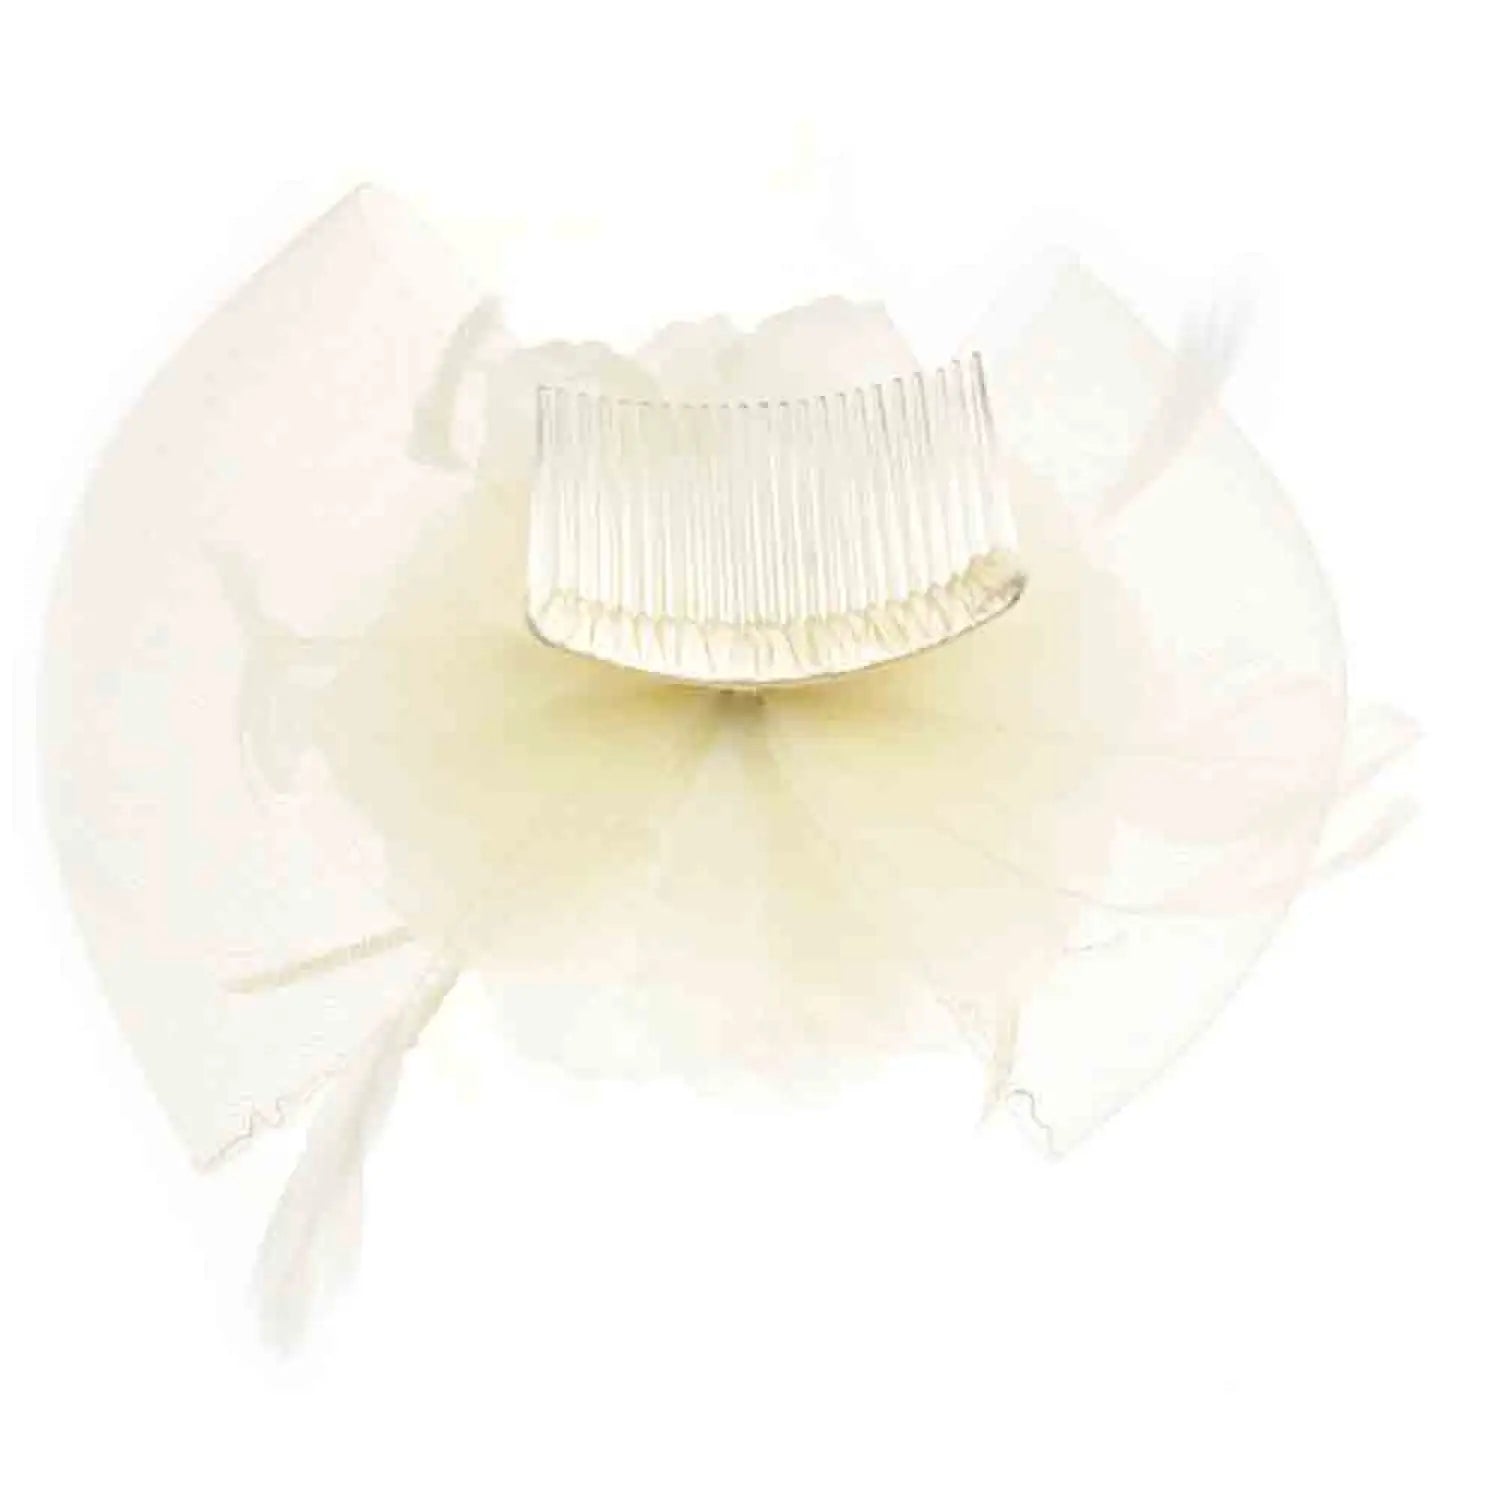 White mesh flower and feather fascinator hair accessory comb on white background.